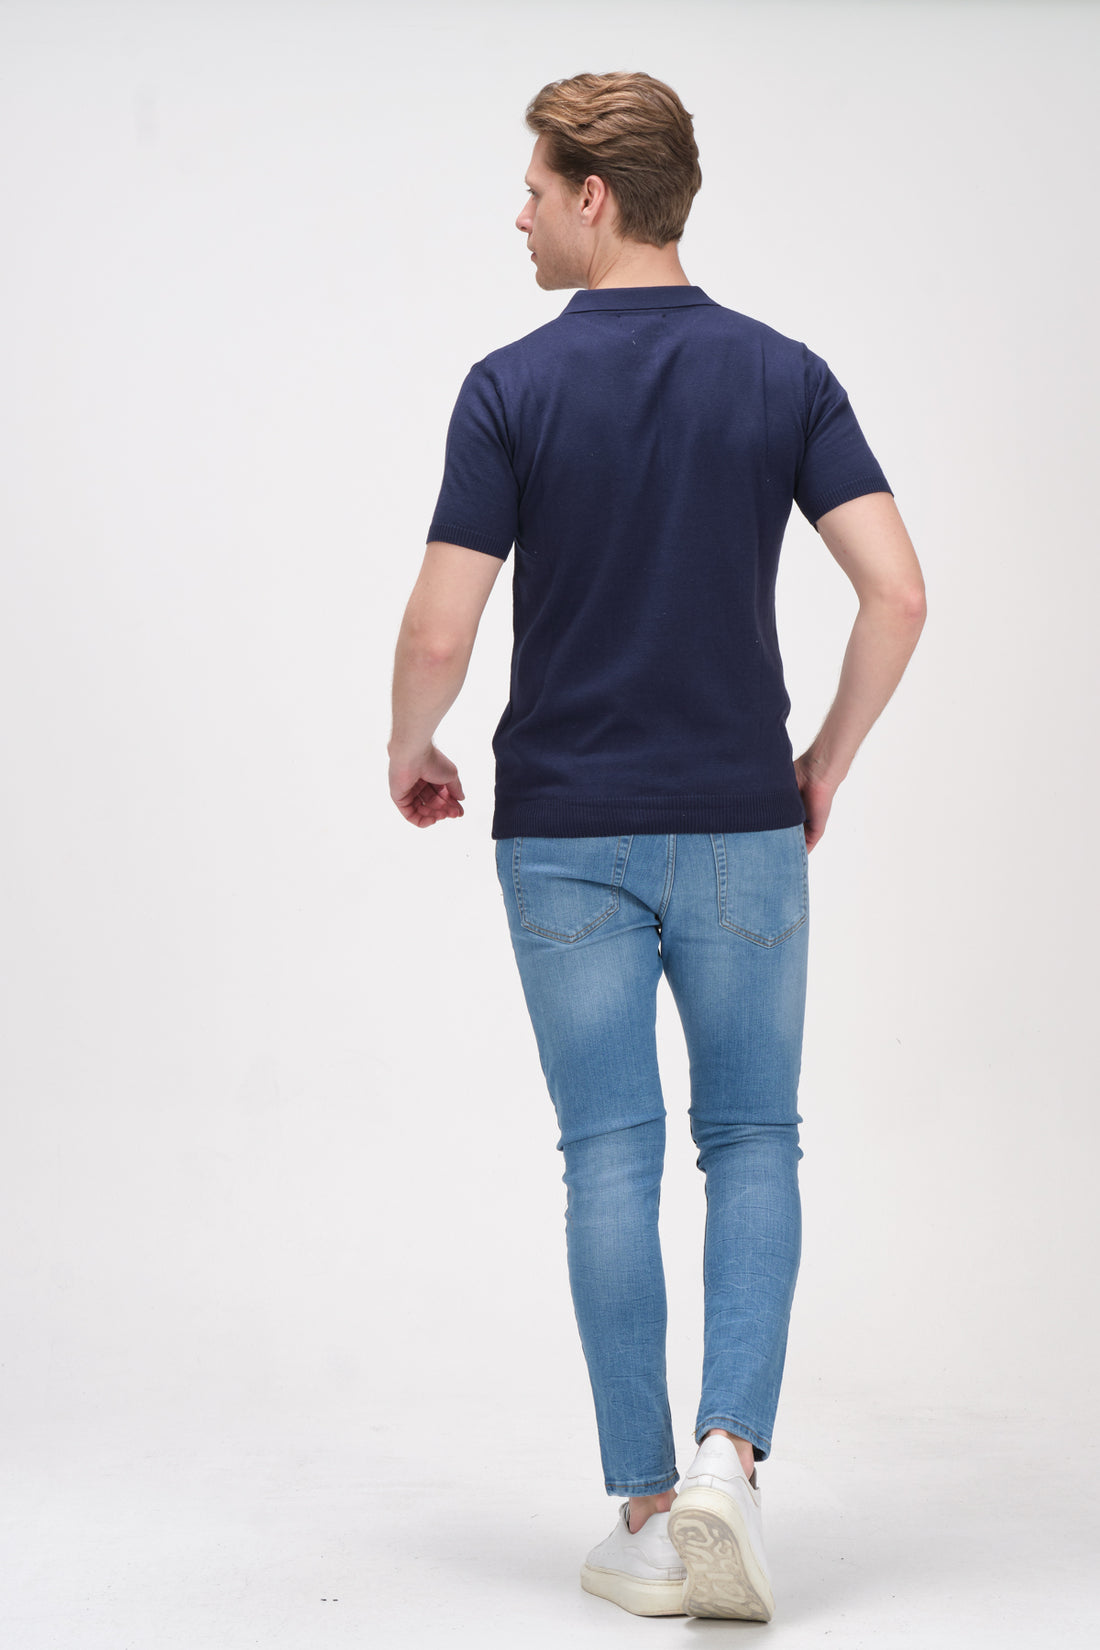 N° 6405 Zipper Knitted Polo Tee - Navy - Ron Tomson